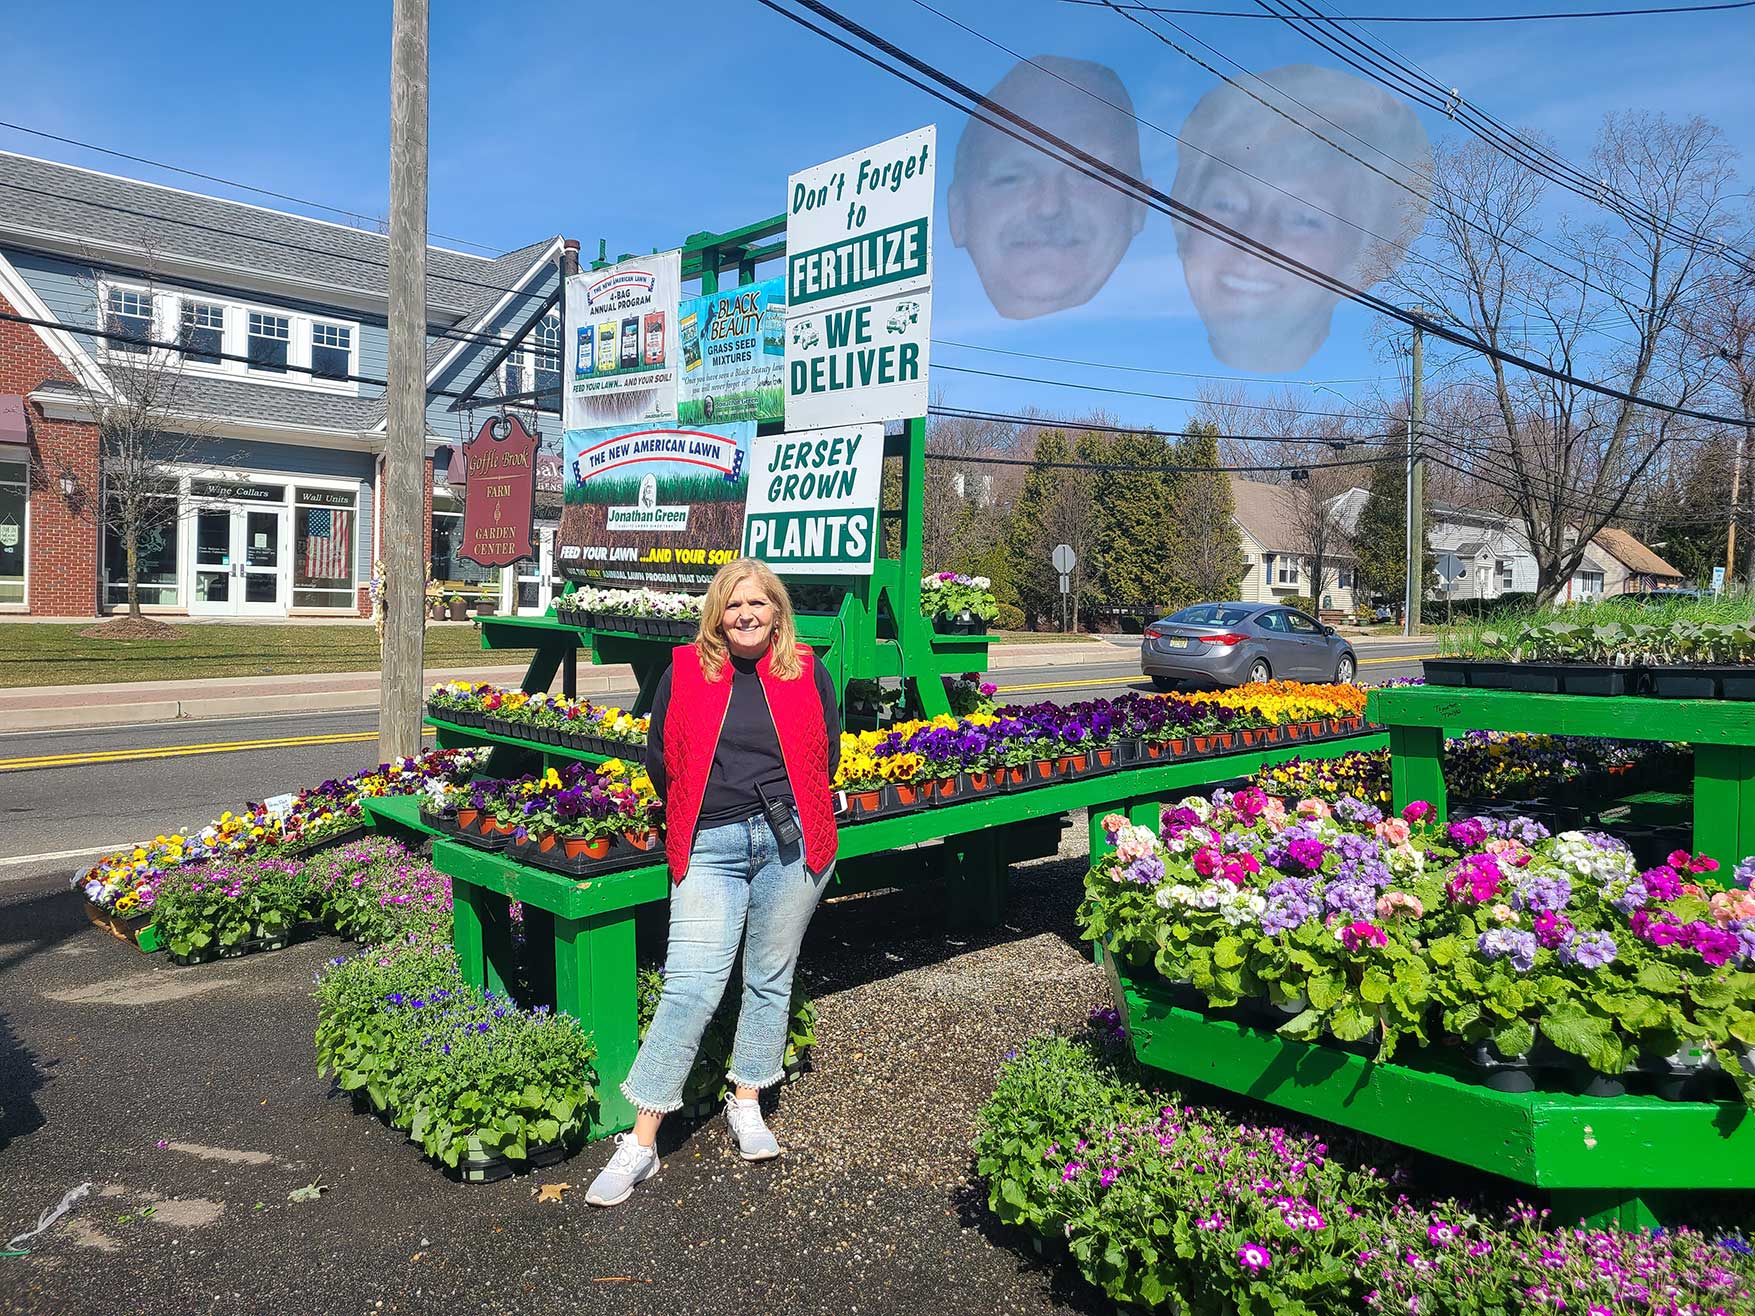 Goffle Brook Farms, founded by Richard and Dancy Osborne, was first opened on May 1st, 1968, and for the 53rd straight year locals know spring has sprung when the pansies start to appear at Goffle Brook Farm